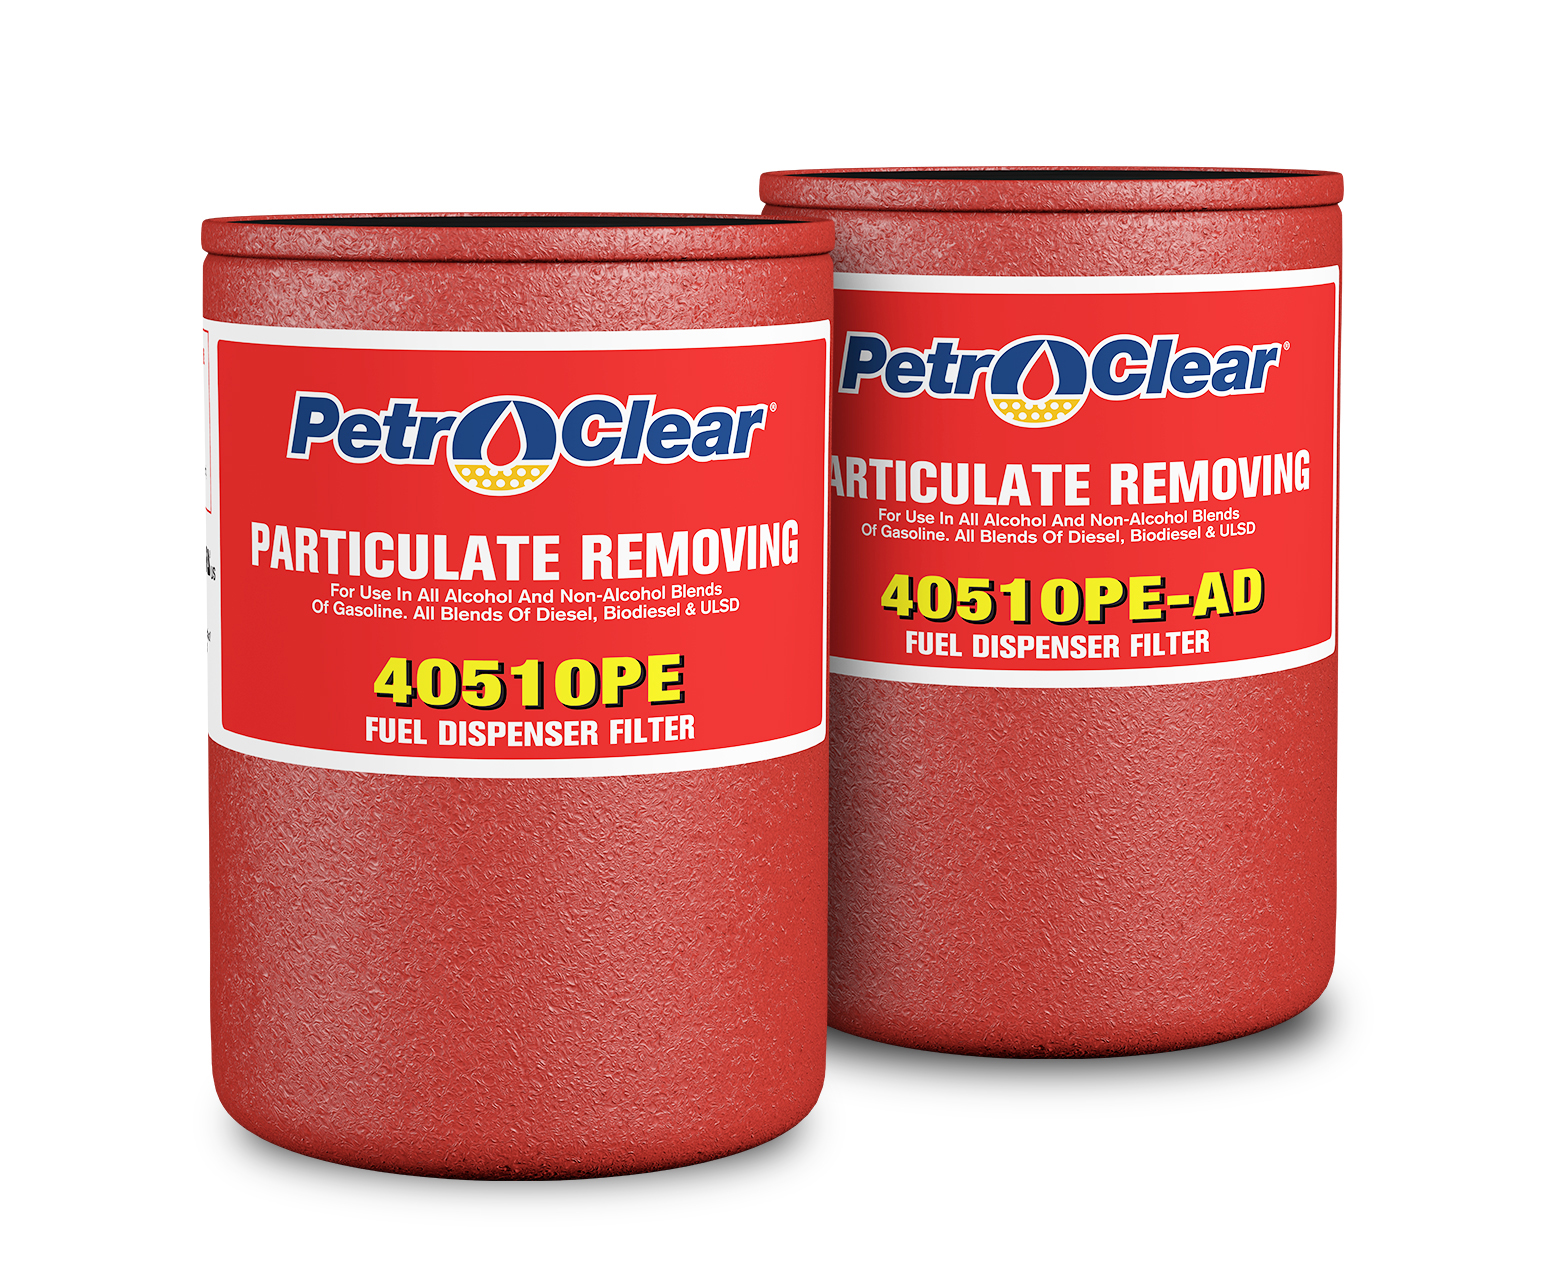 New E85-Compatible Spin-On Dispenser Filters  from PetroClear<sup>®</sup> Promote Fuel System Integrity